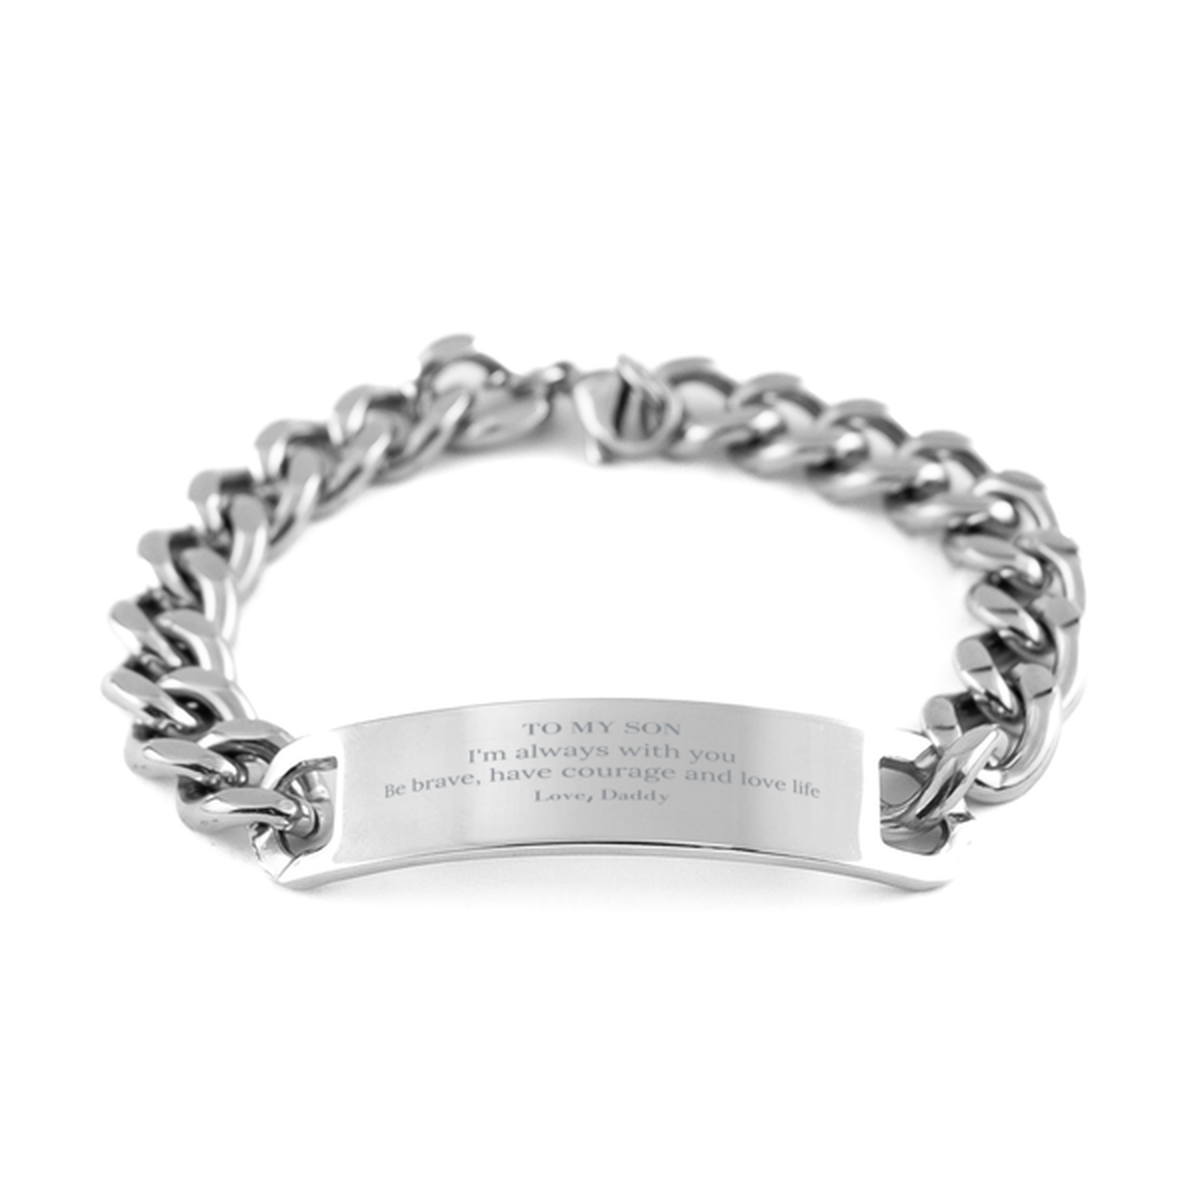 To My Son Gifts from Daddy, Unique Cuban Chain Stainless Steel Bracelet Inspirational Christmas Birthday Graduation Gifts for Son I'm always with you. Be brave, have courage and love life. Love, Daddy